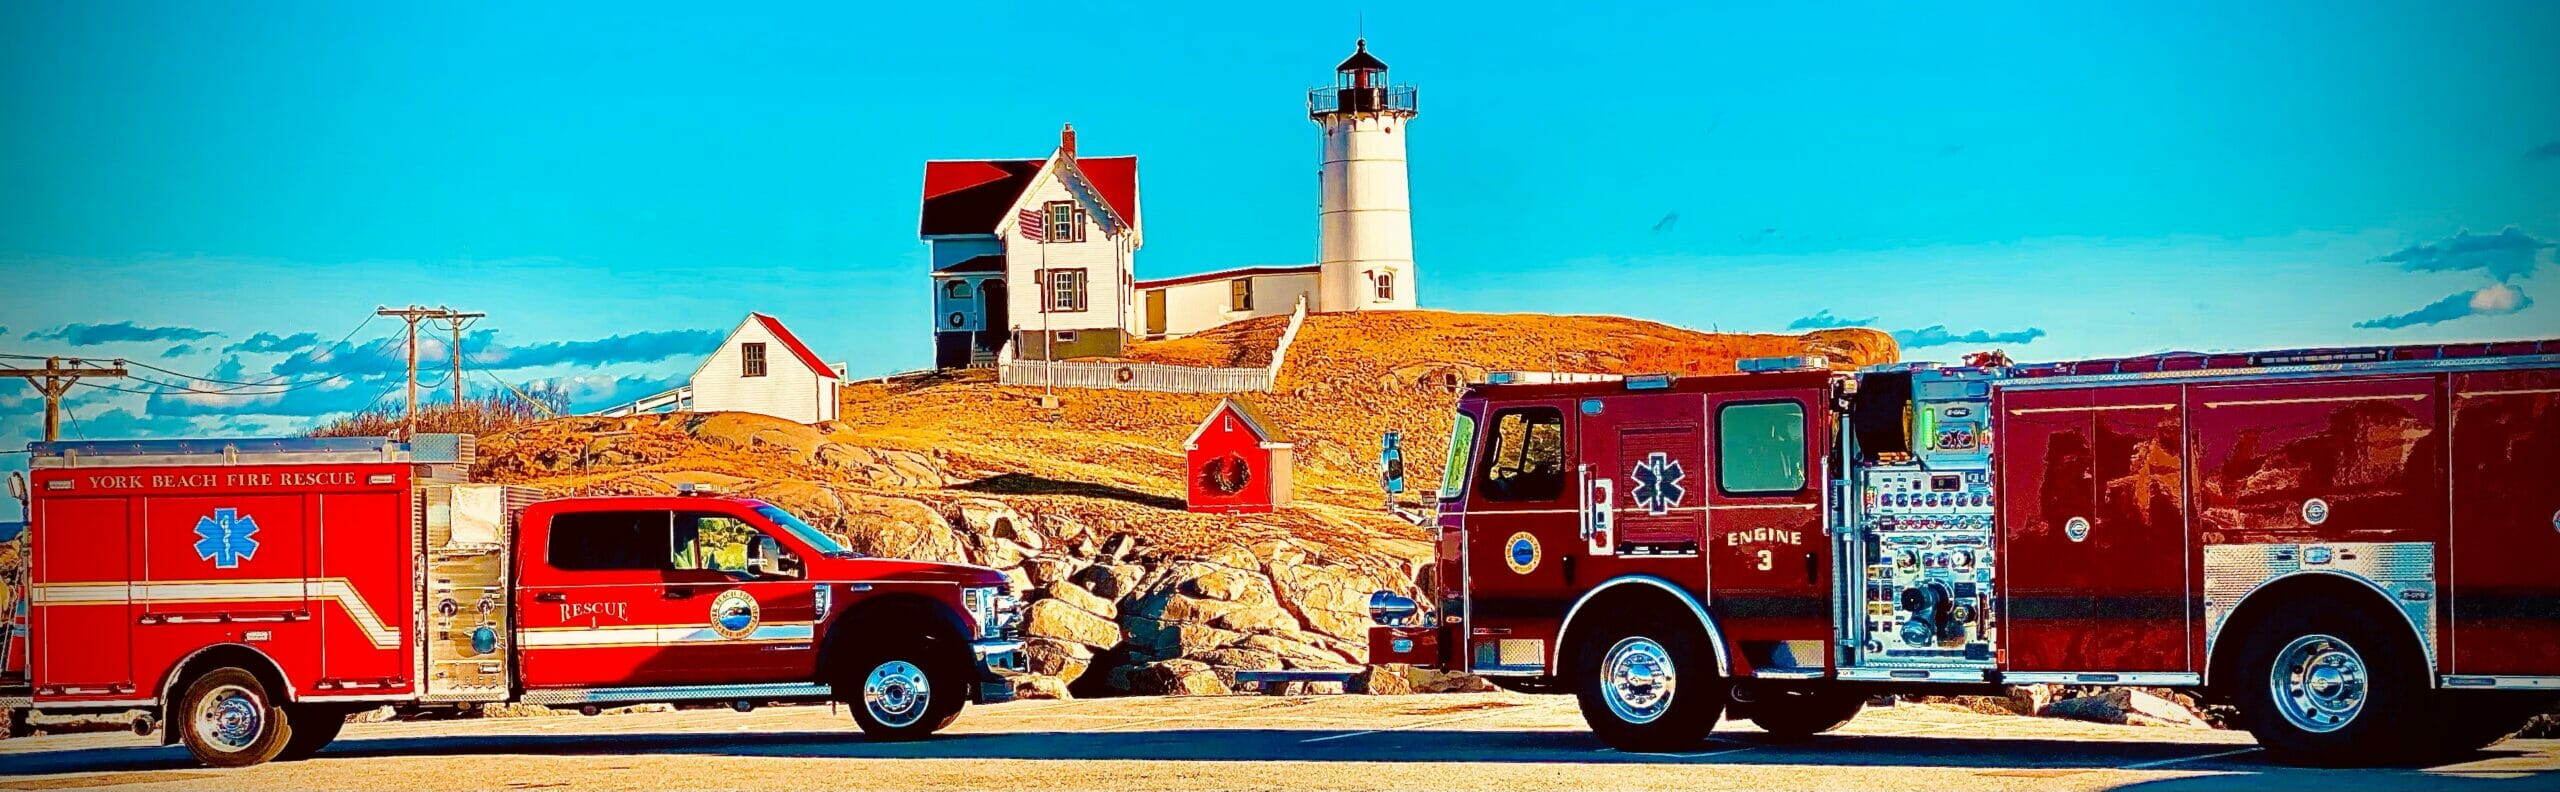 Engine 3 and Rescue 1 at Nubble Light